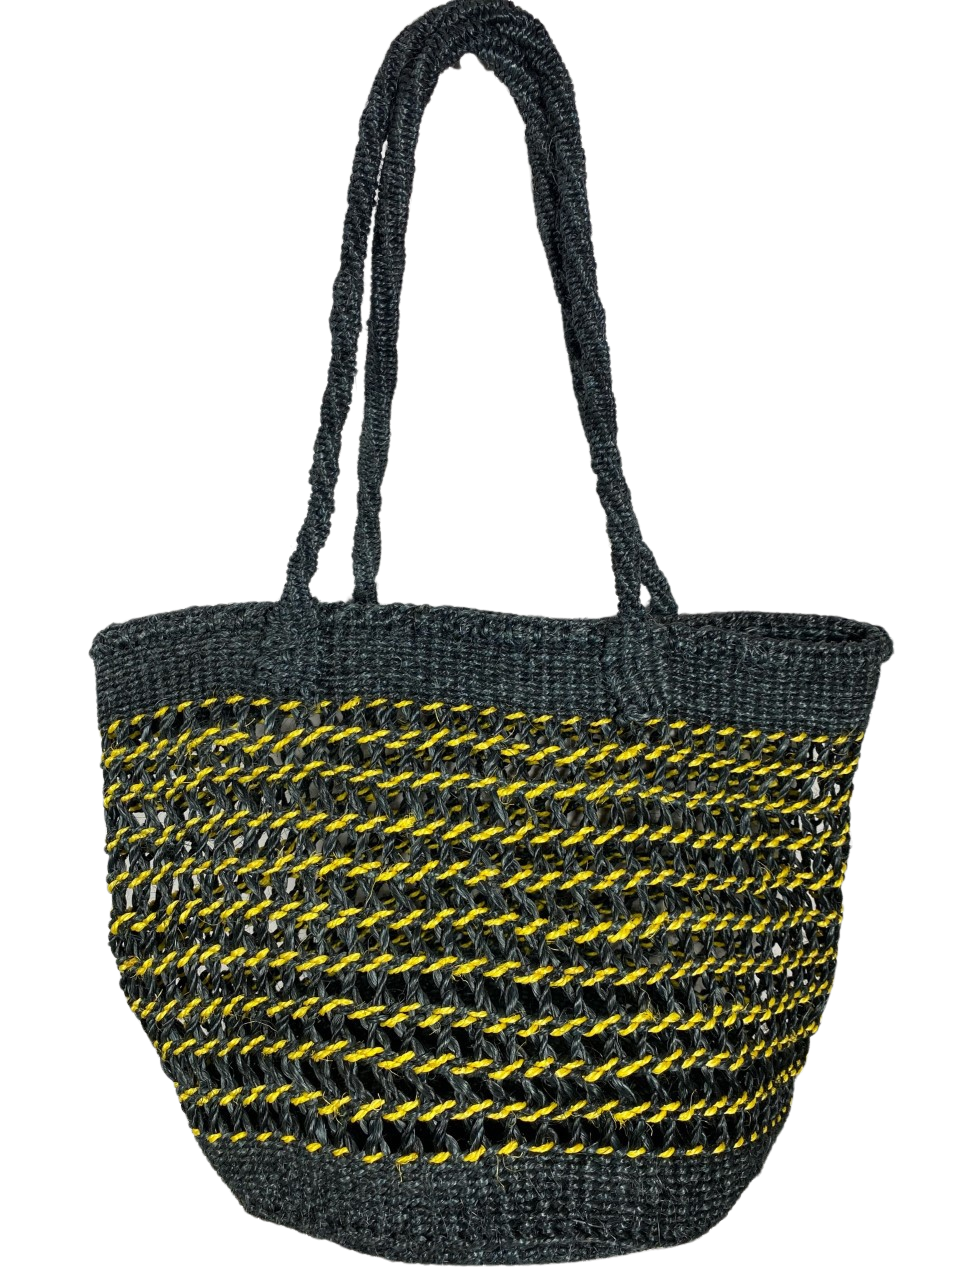 Yellow & Black Netted Open Weave Tote Basket